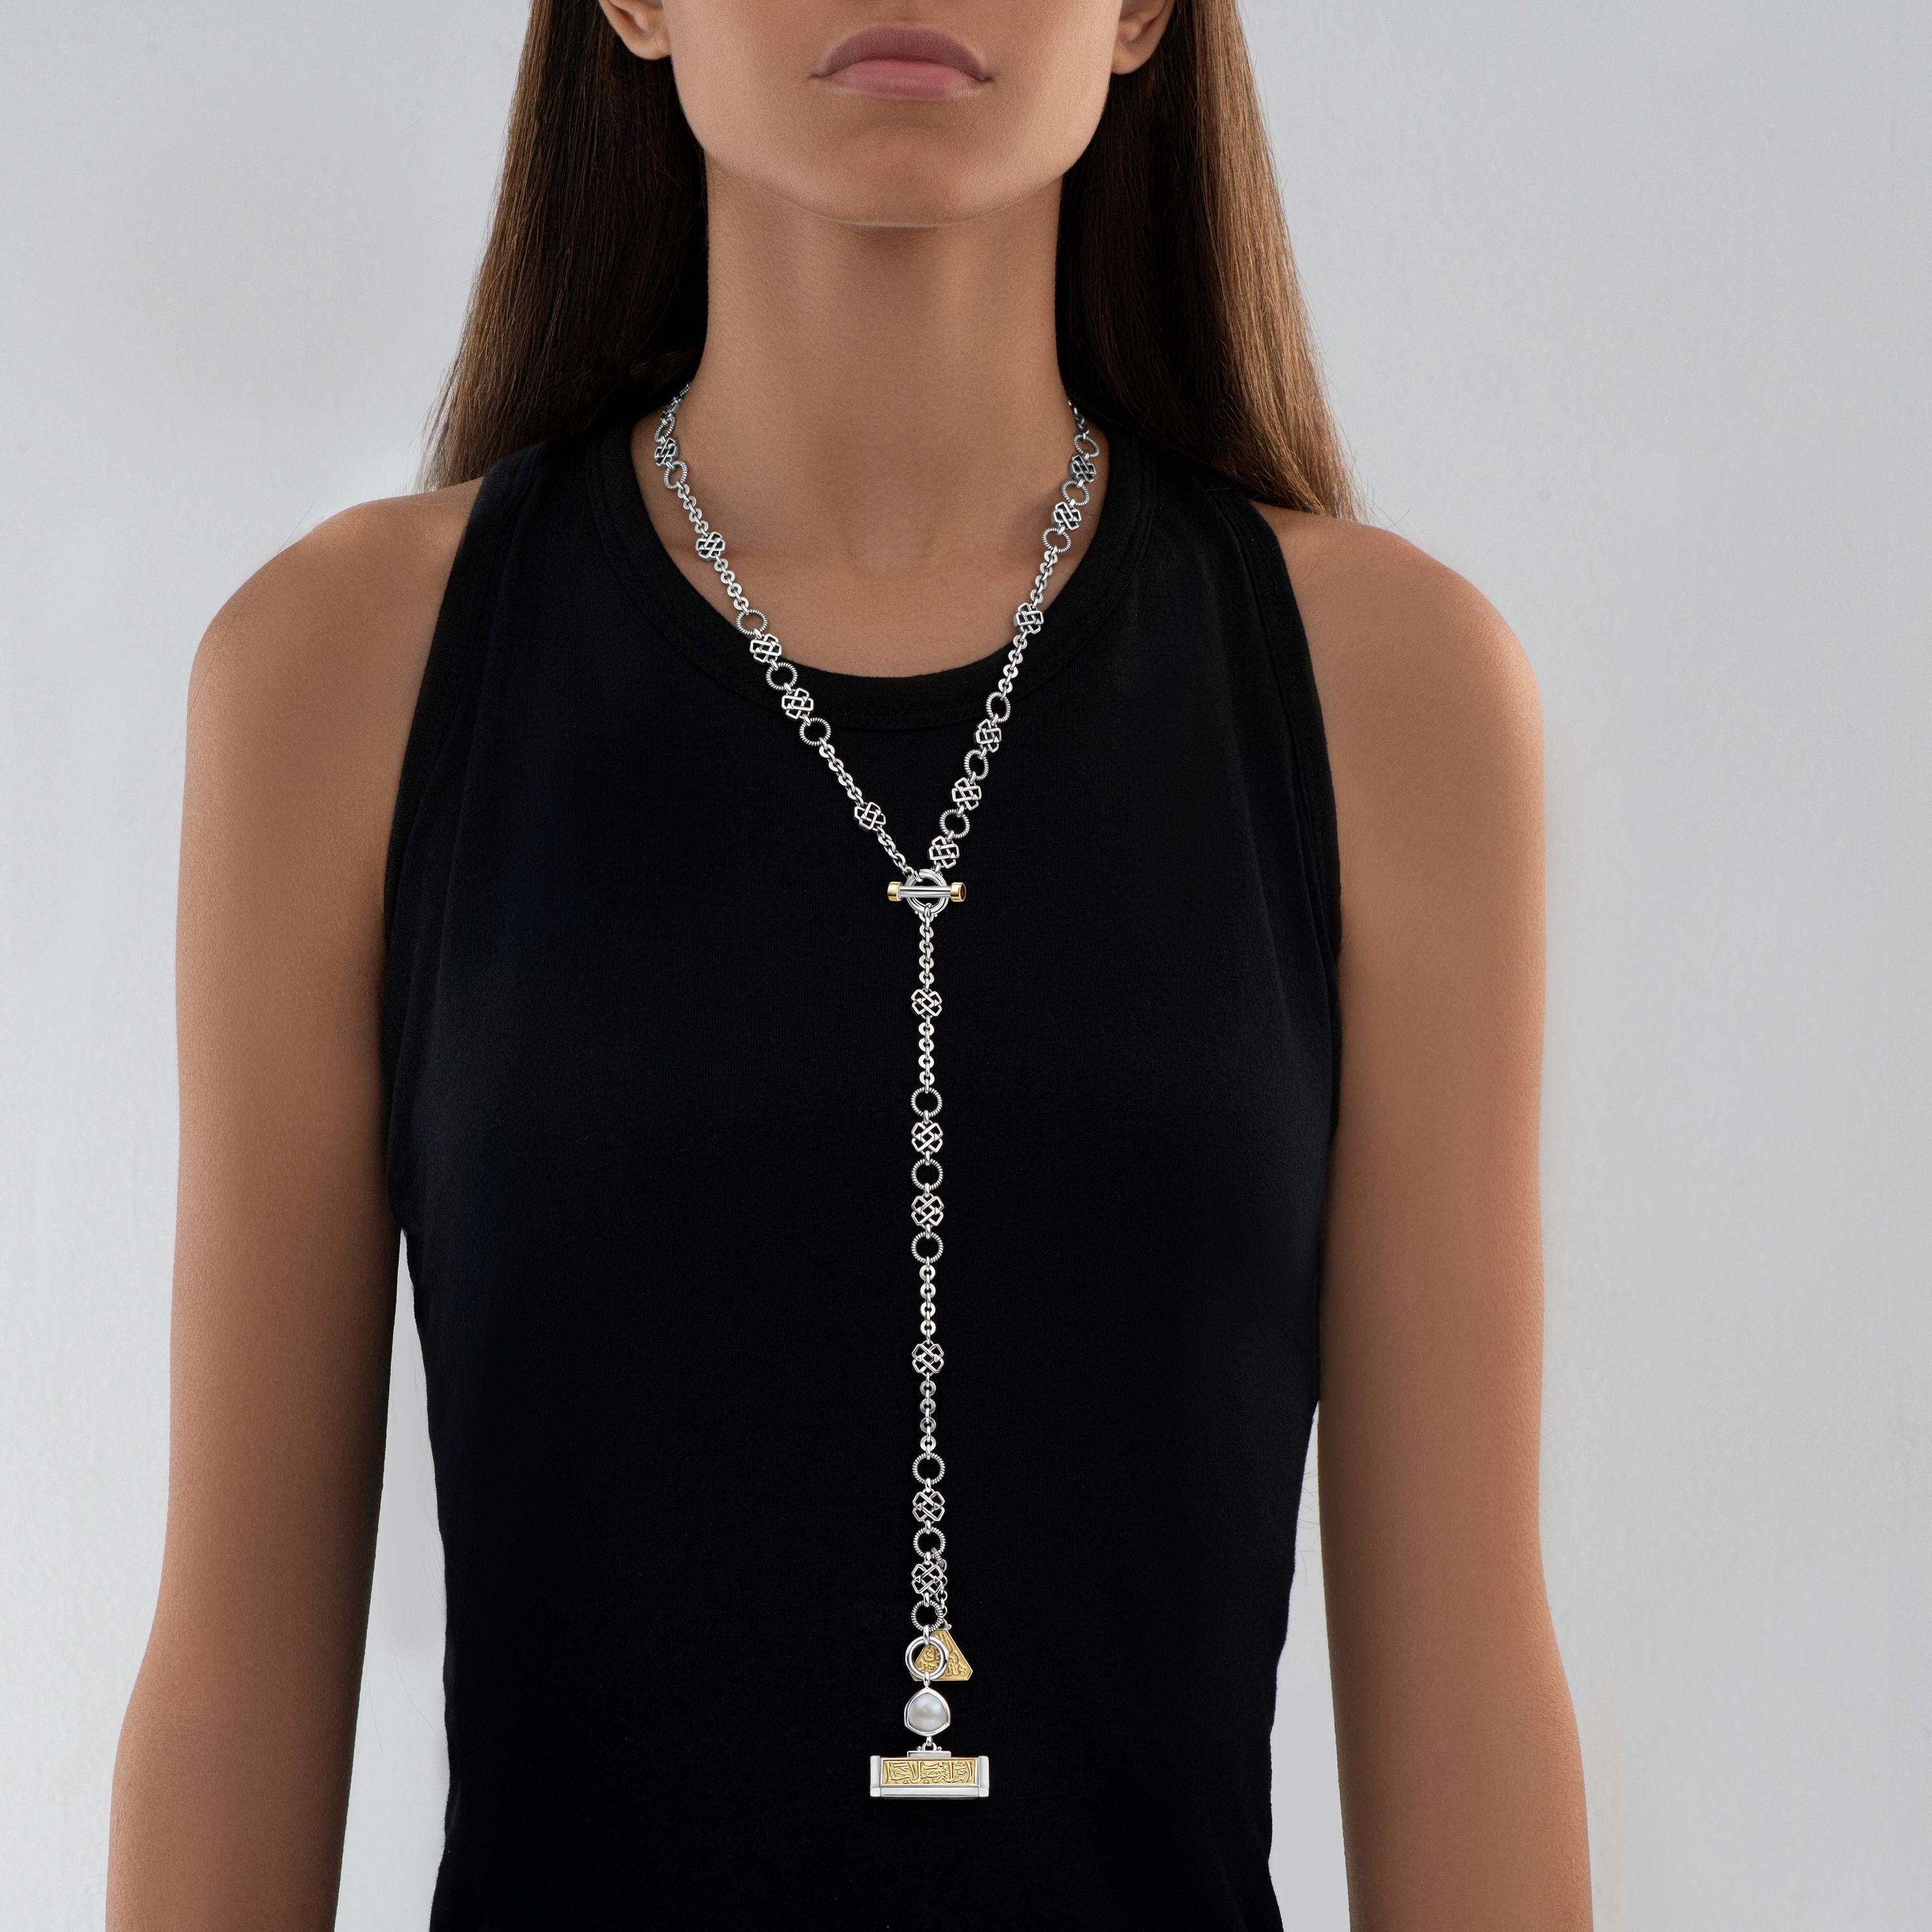 Sterling Silver and 18 Karat Gold Necklace that can be adjusted to be worn as a Long Necklace or in a Lariat-style. Adorned with Garnets and Cultured Pearls, the Necklace features Azza Fahmy's signature Arabic Calligraphy and T-Lock